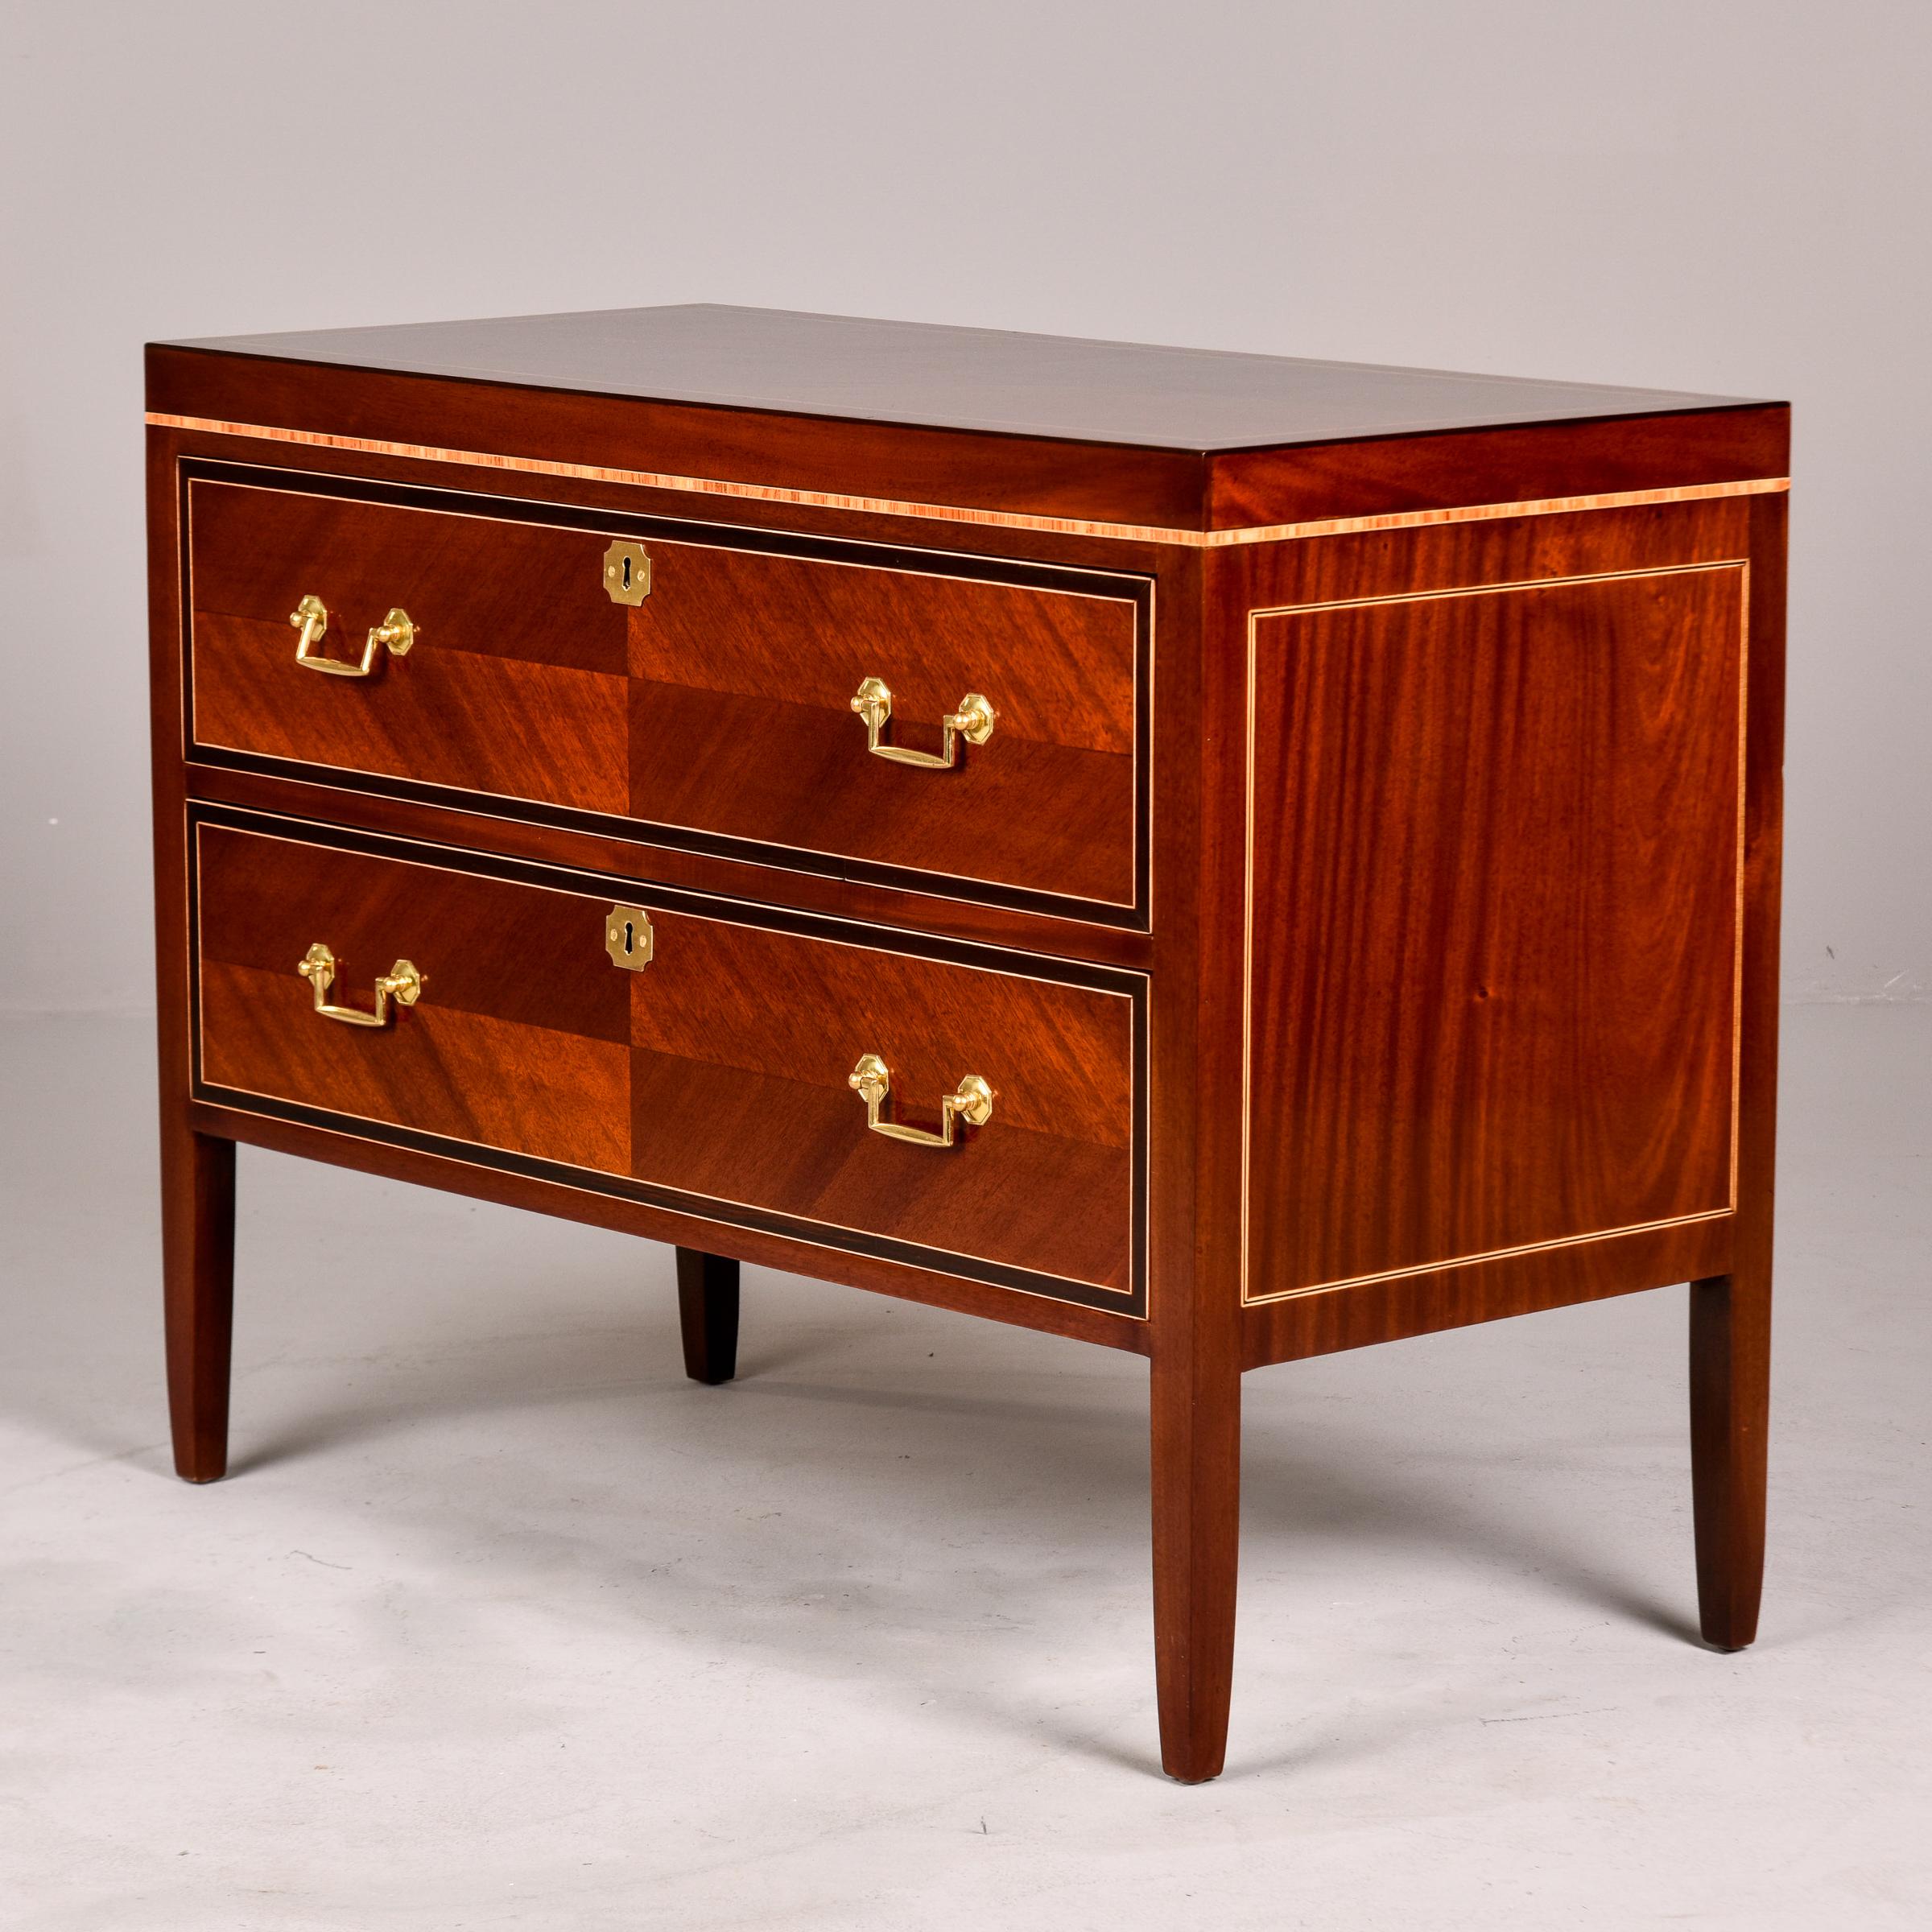 Circa 1930s English chest of two drawers has polished walnut veneer on the front, sides and top with contrasting maple and ebony details. Brass drawer pull hardware and escutcheons. Functional lock on drawers - one skeleton key included. Unknown